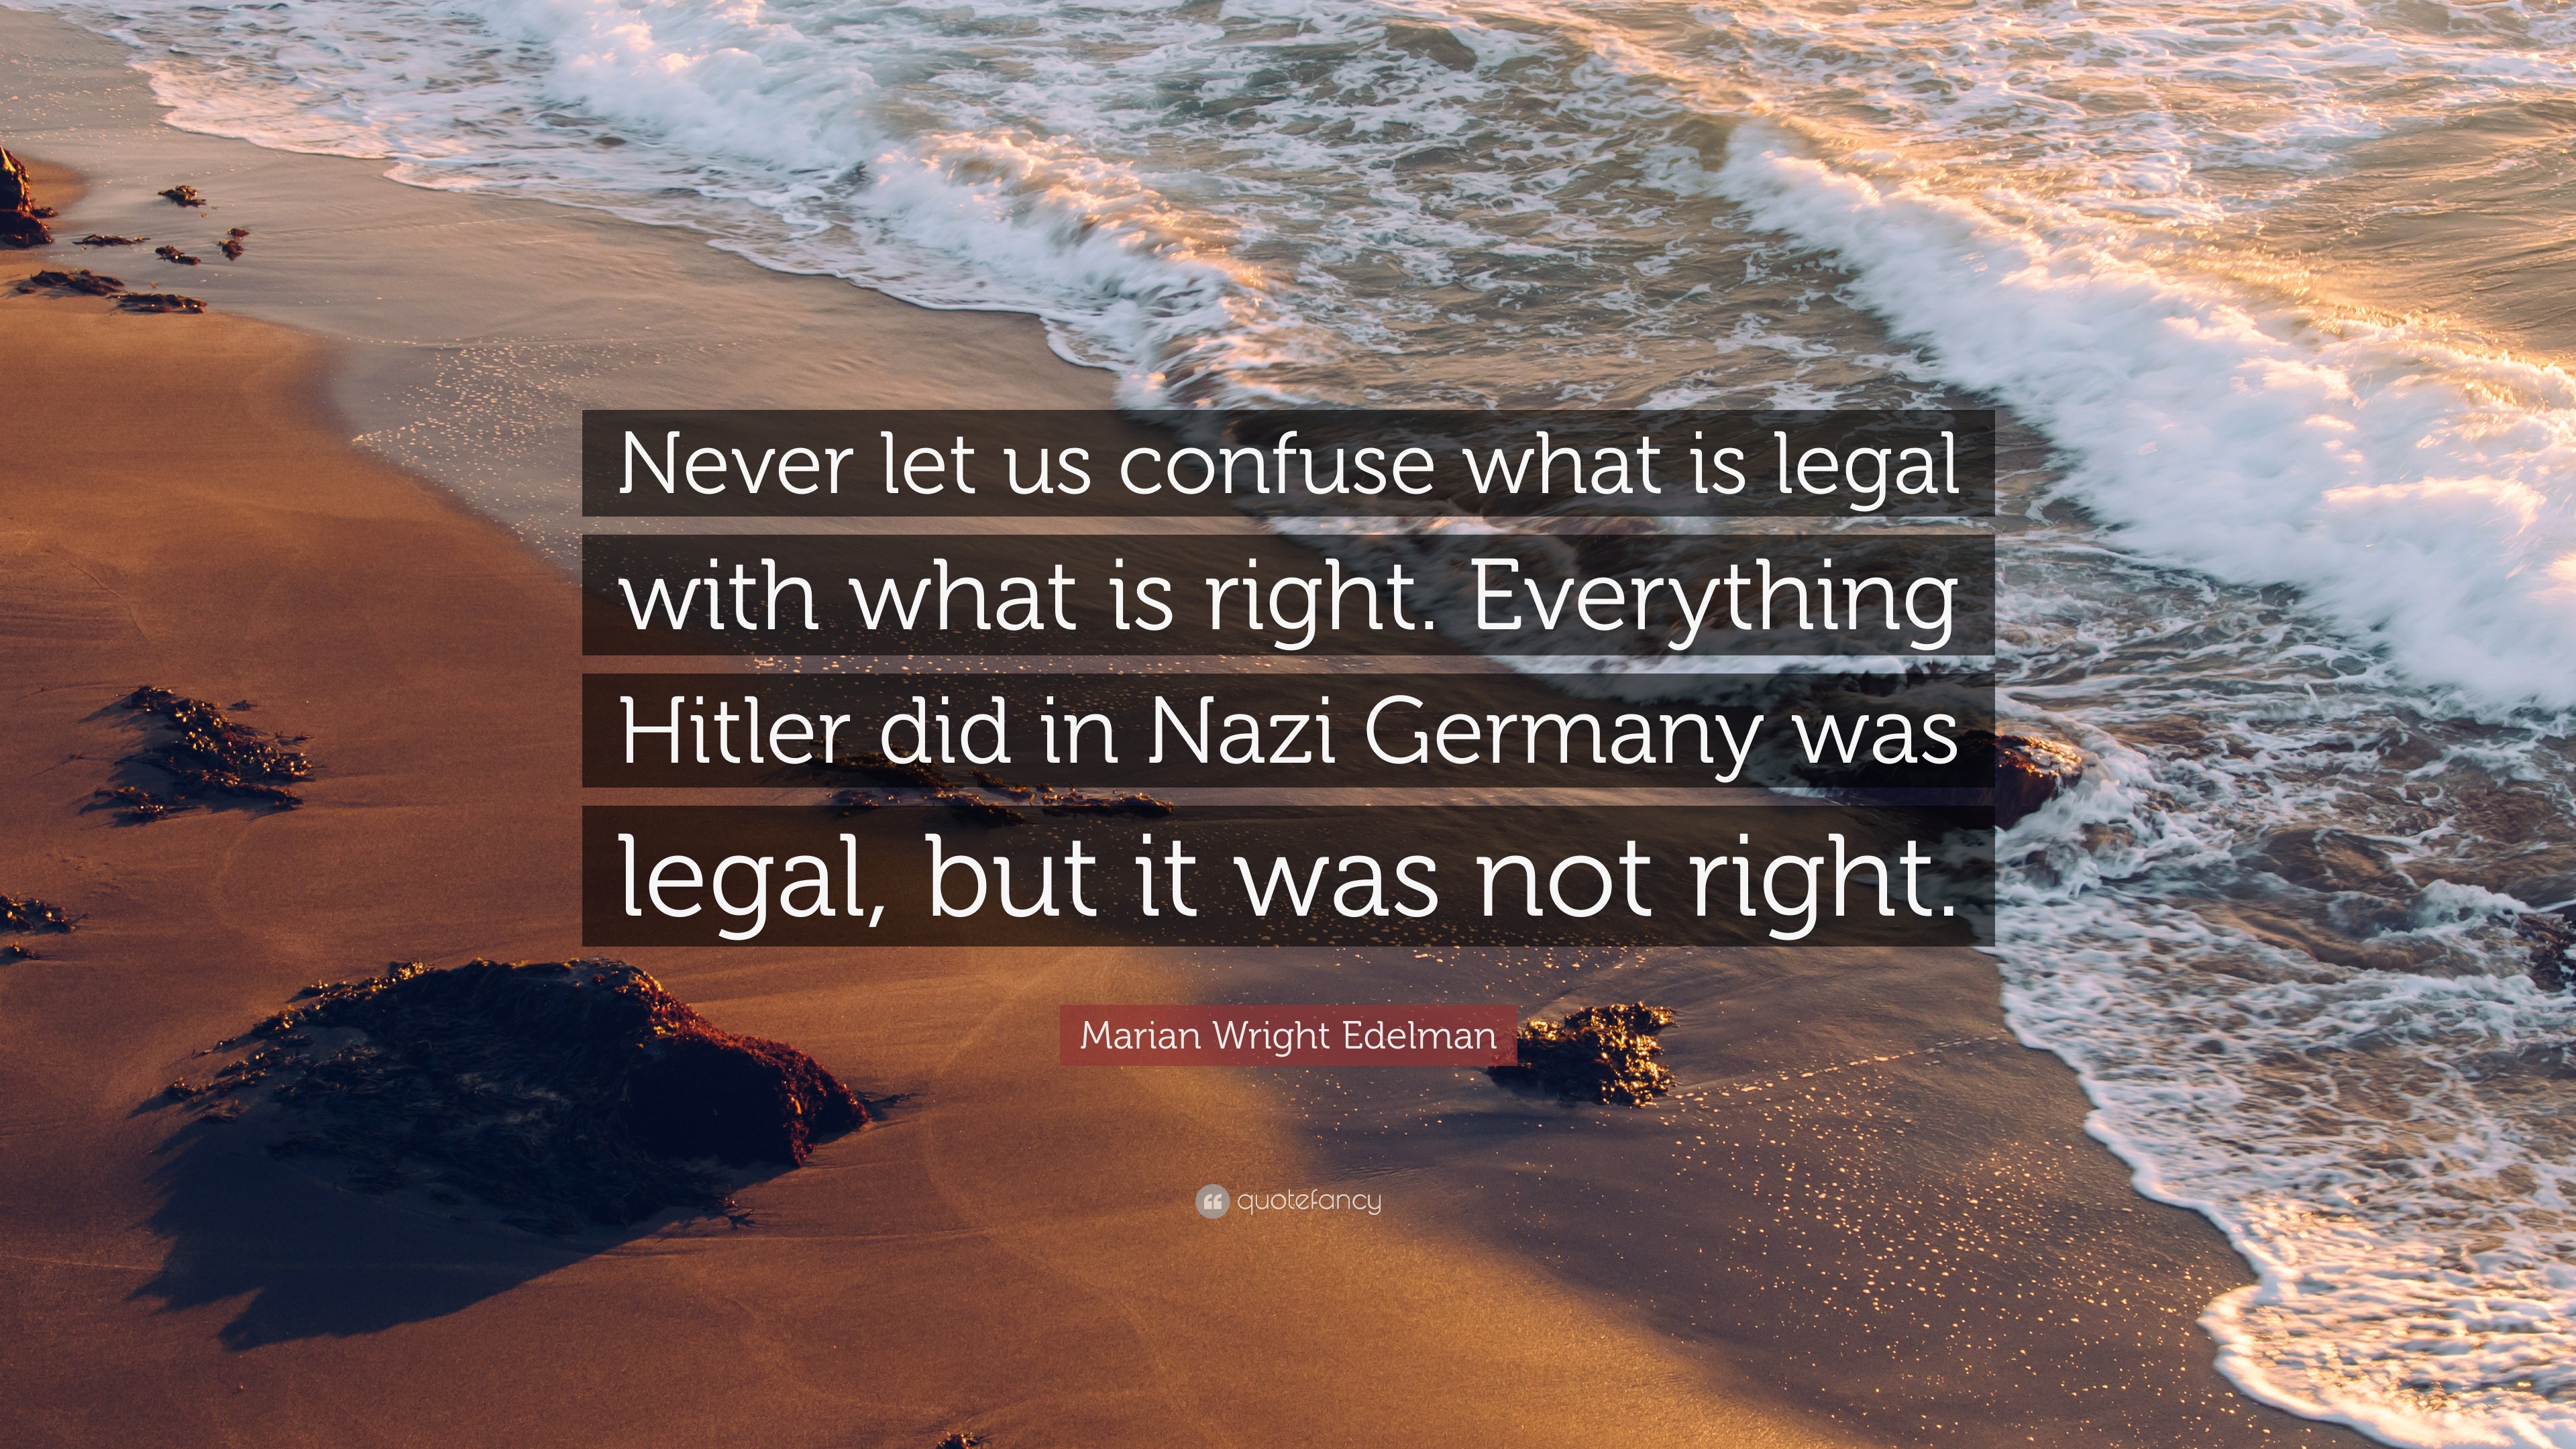 Marian Wright Edelman Quote: “Never let us confuse what is legal with what  is right. Everything Hitler did in Nazi Germany was legal, but it was not  r...”